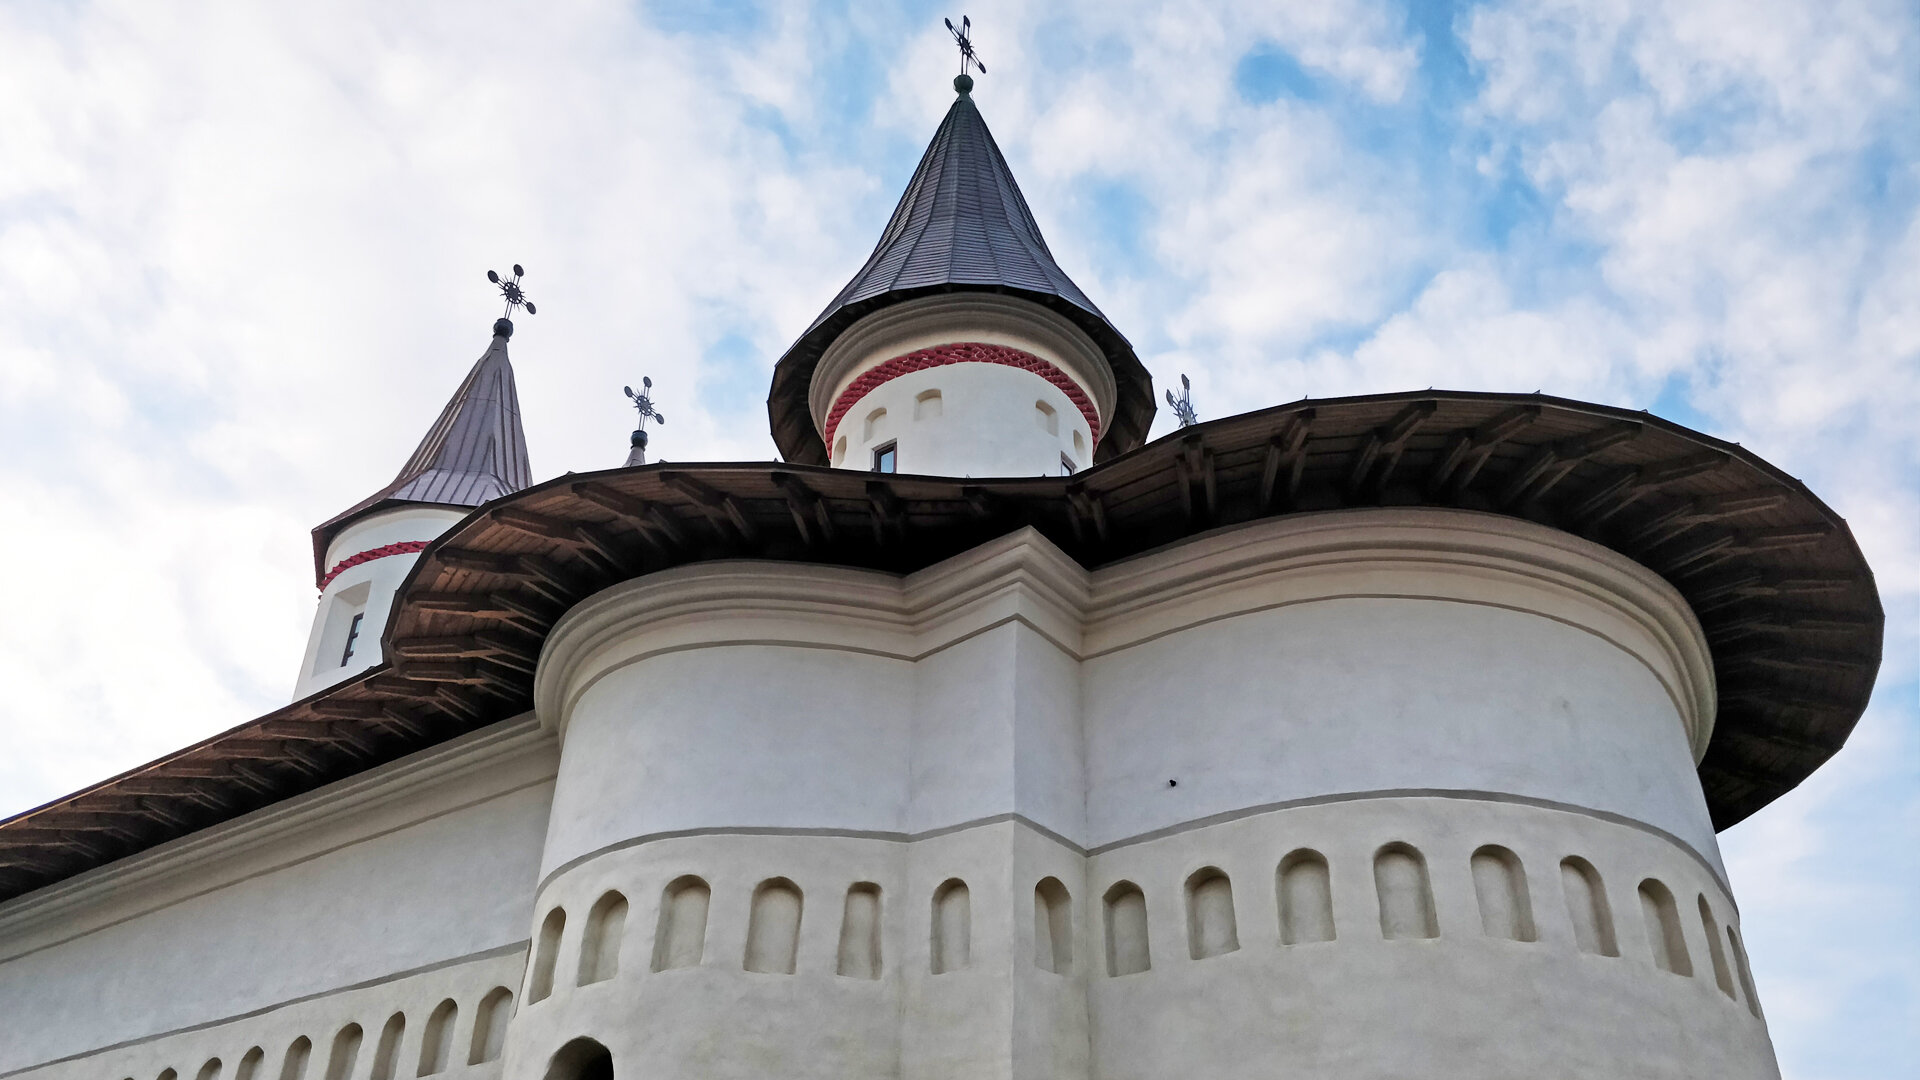 The conservation of Cultural Heritage of the “Assumption of the Virgin Mary” Church in Ilișești, Suceava County